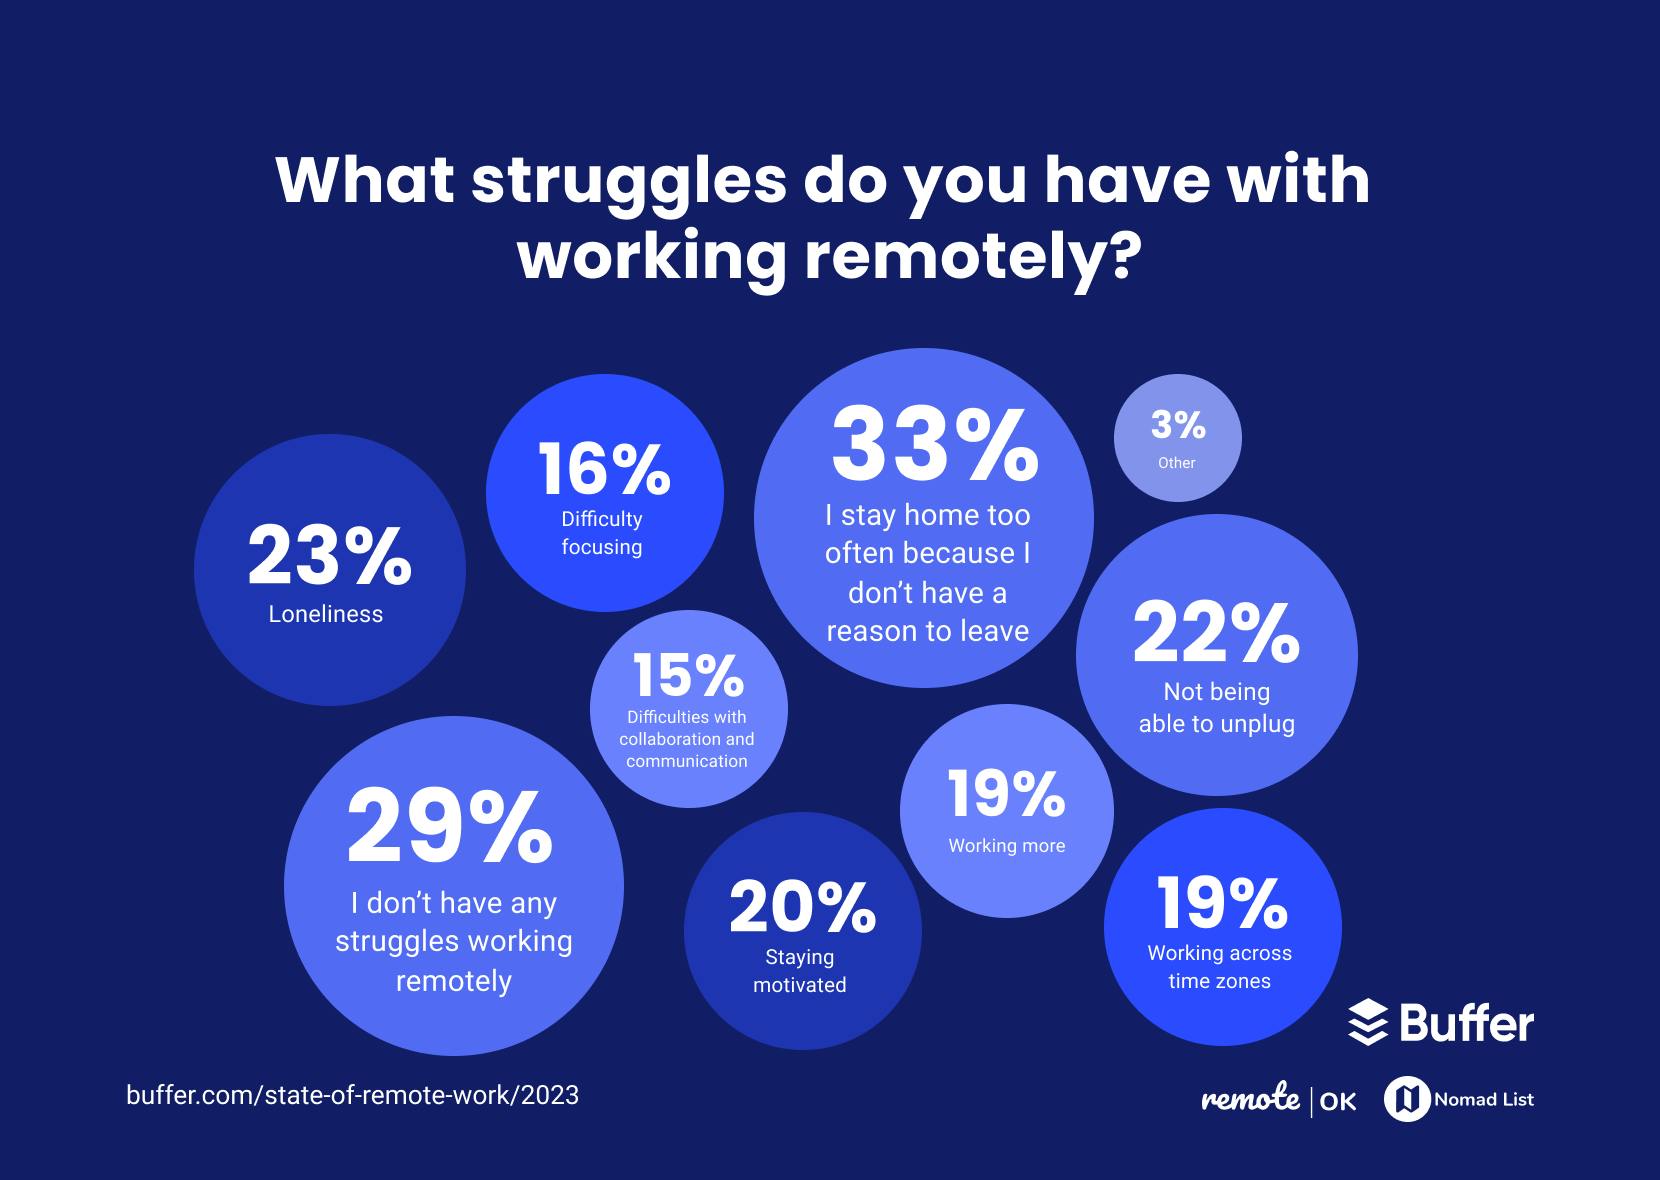 Photos: 20 home office must-haves for remote workers